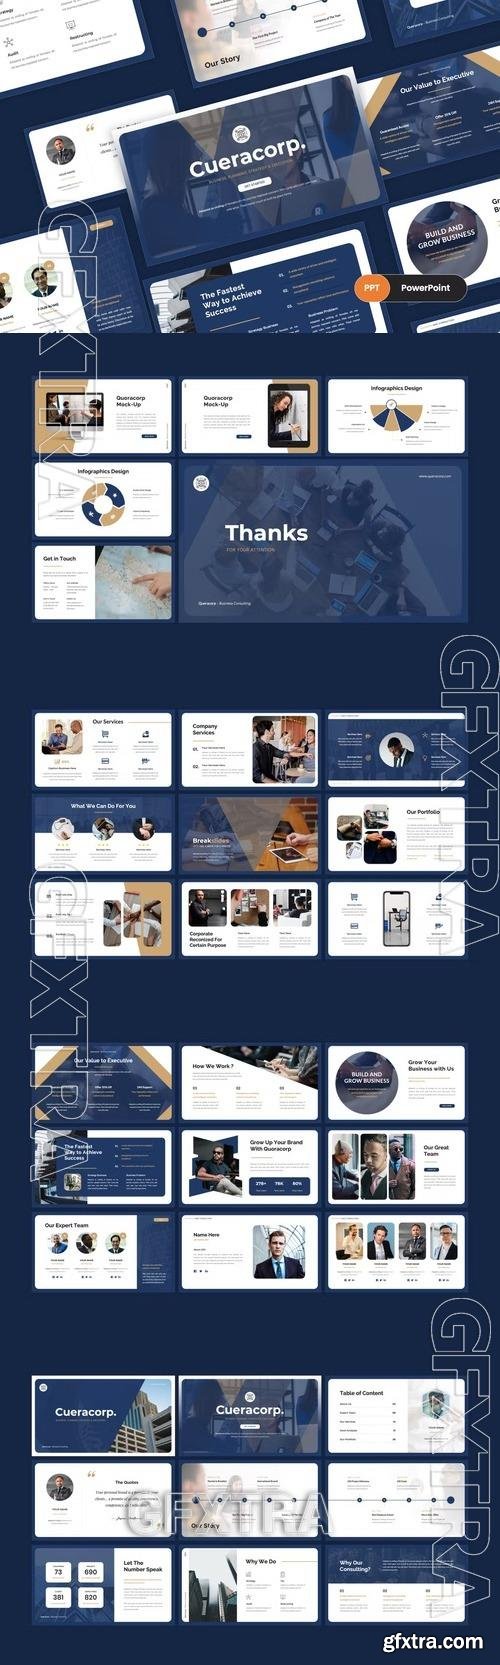 Queracorp - Business PowerPoint Template UGSEJT9